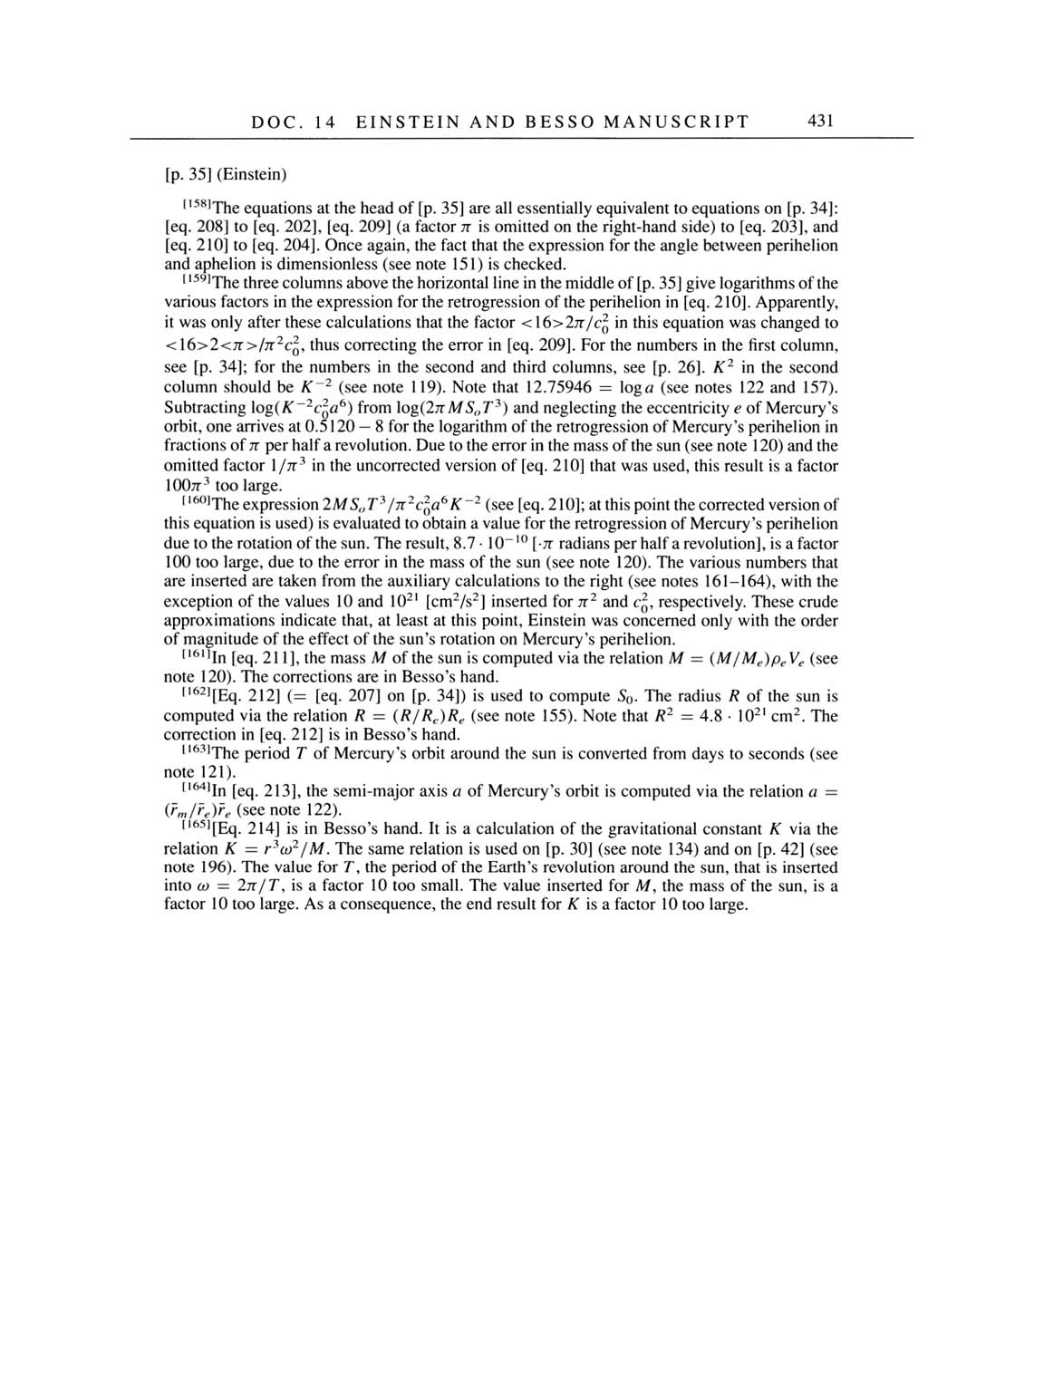 Volume 4: The Swiss Years: Writings 1912-1914 page 431